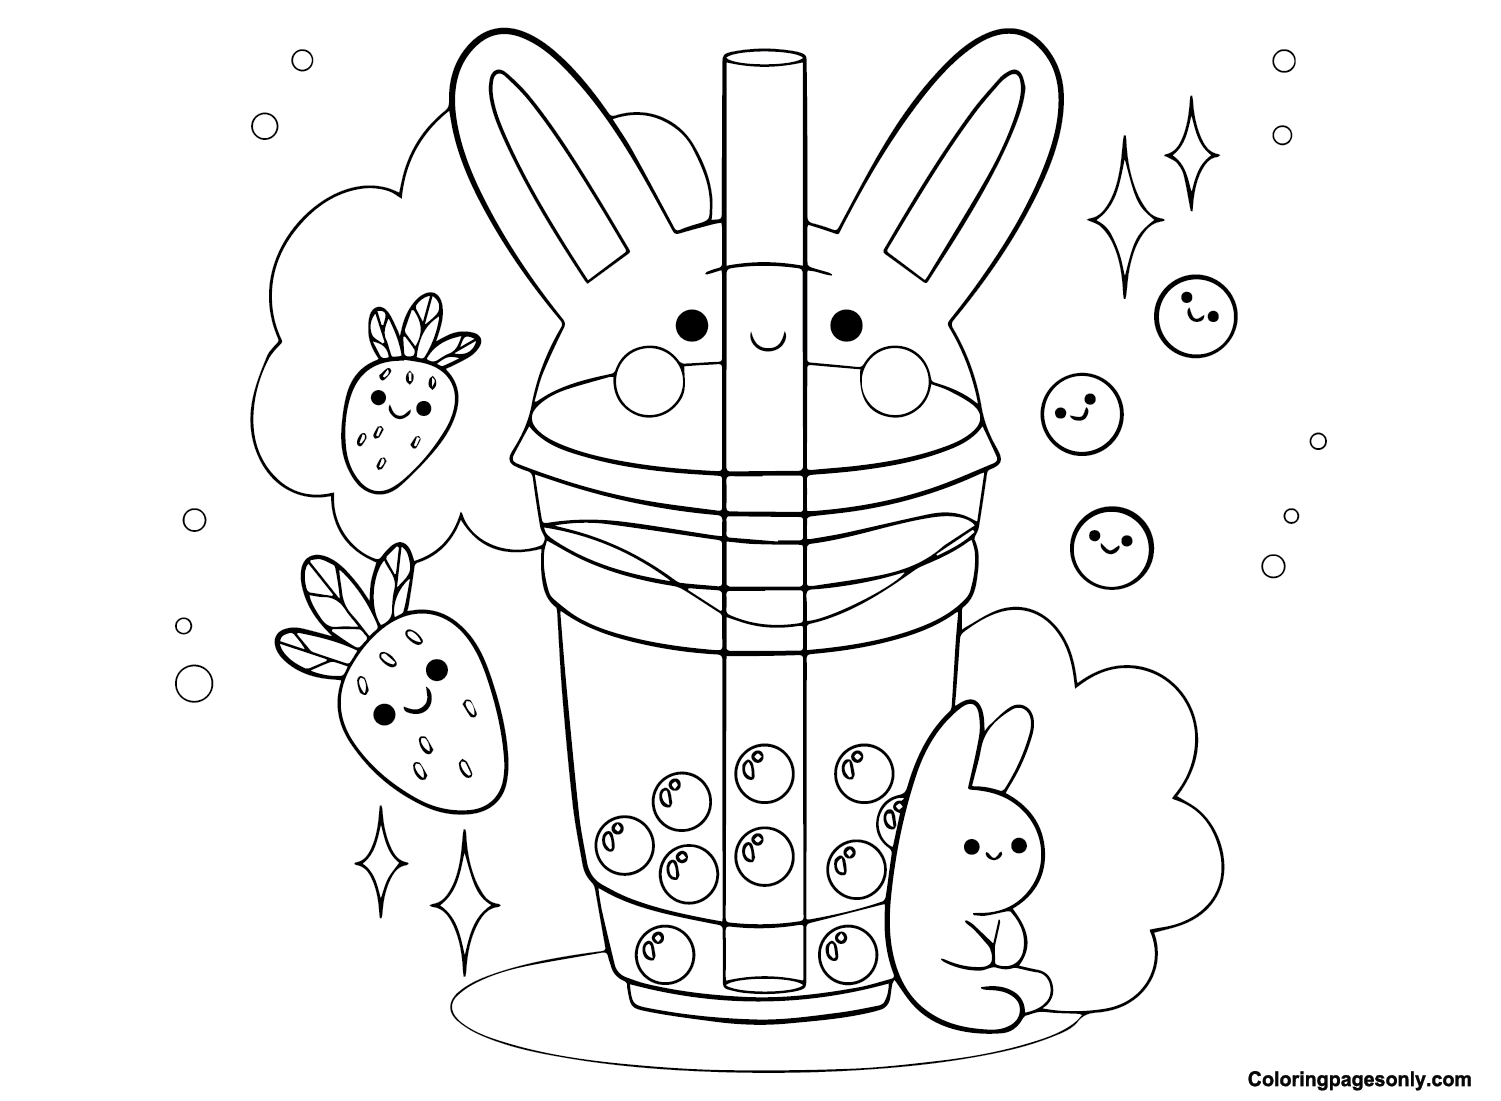 Boba Tea Pictures Coloring Page